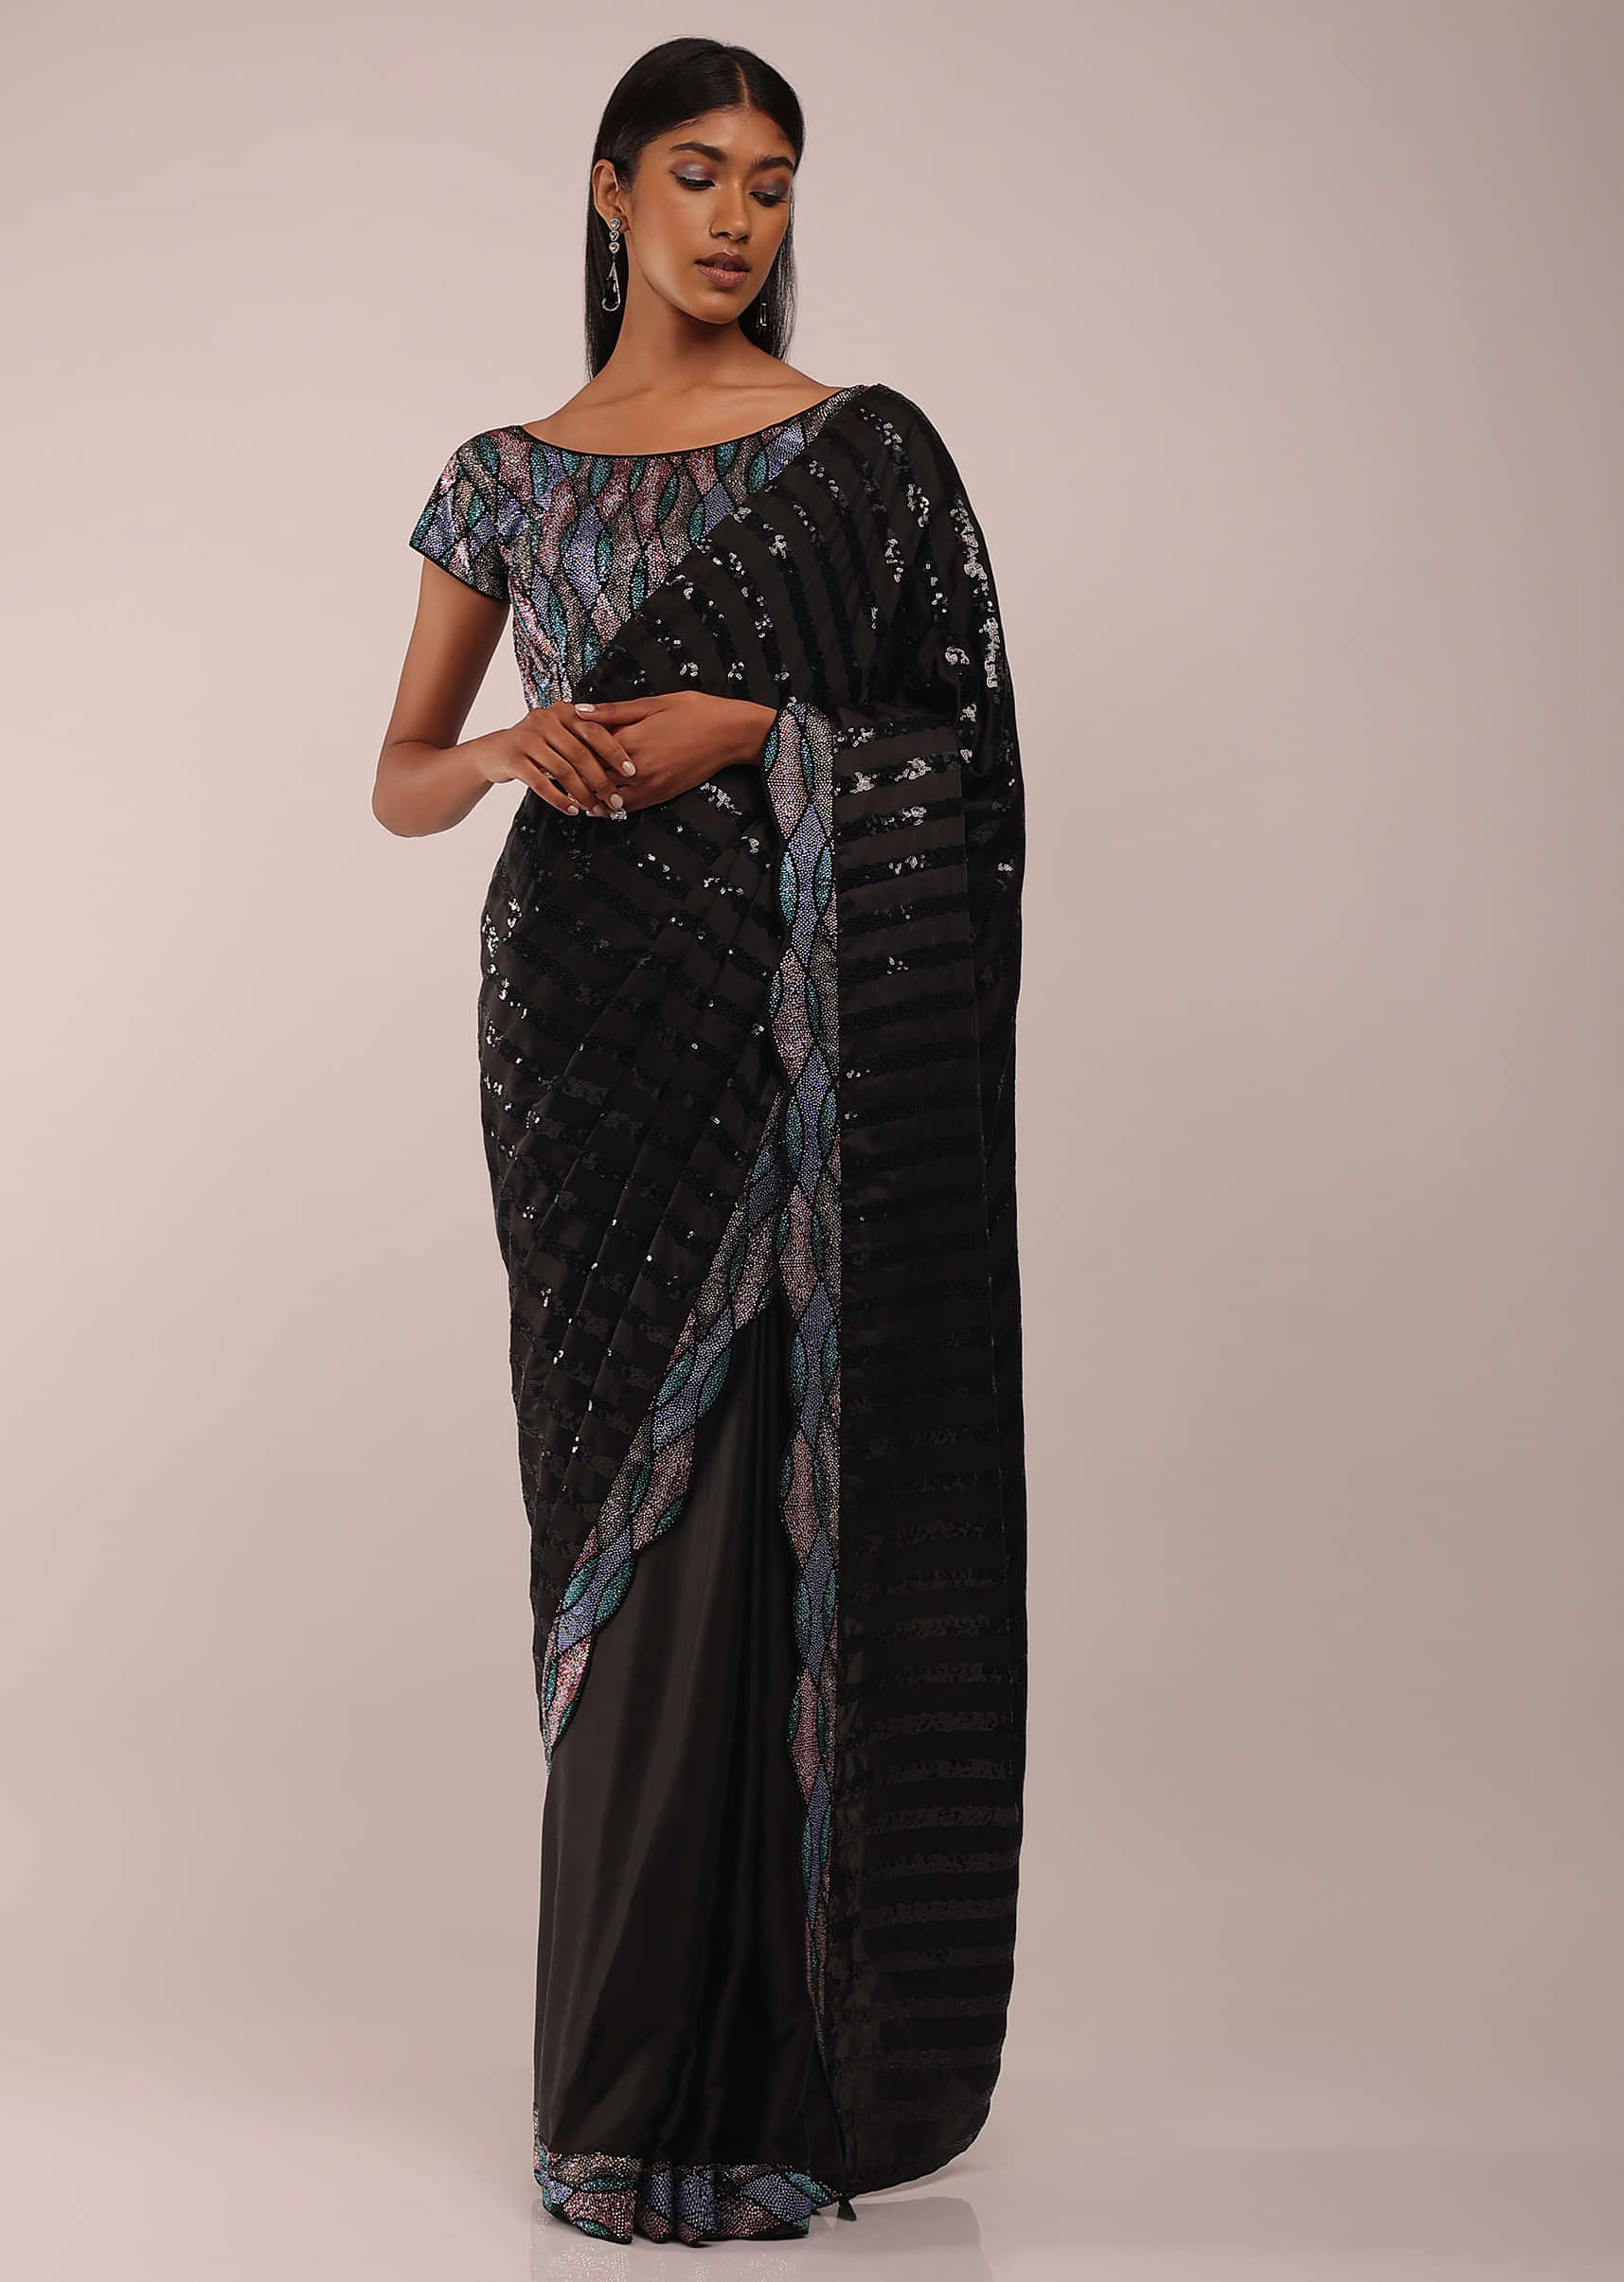 Black Satin Sequins Saree With Multi-Color Beads And Stones Embellishment In Sea Waves Design On The Pallu Border With The Scalloped Cutwork